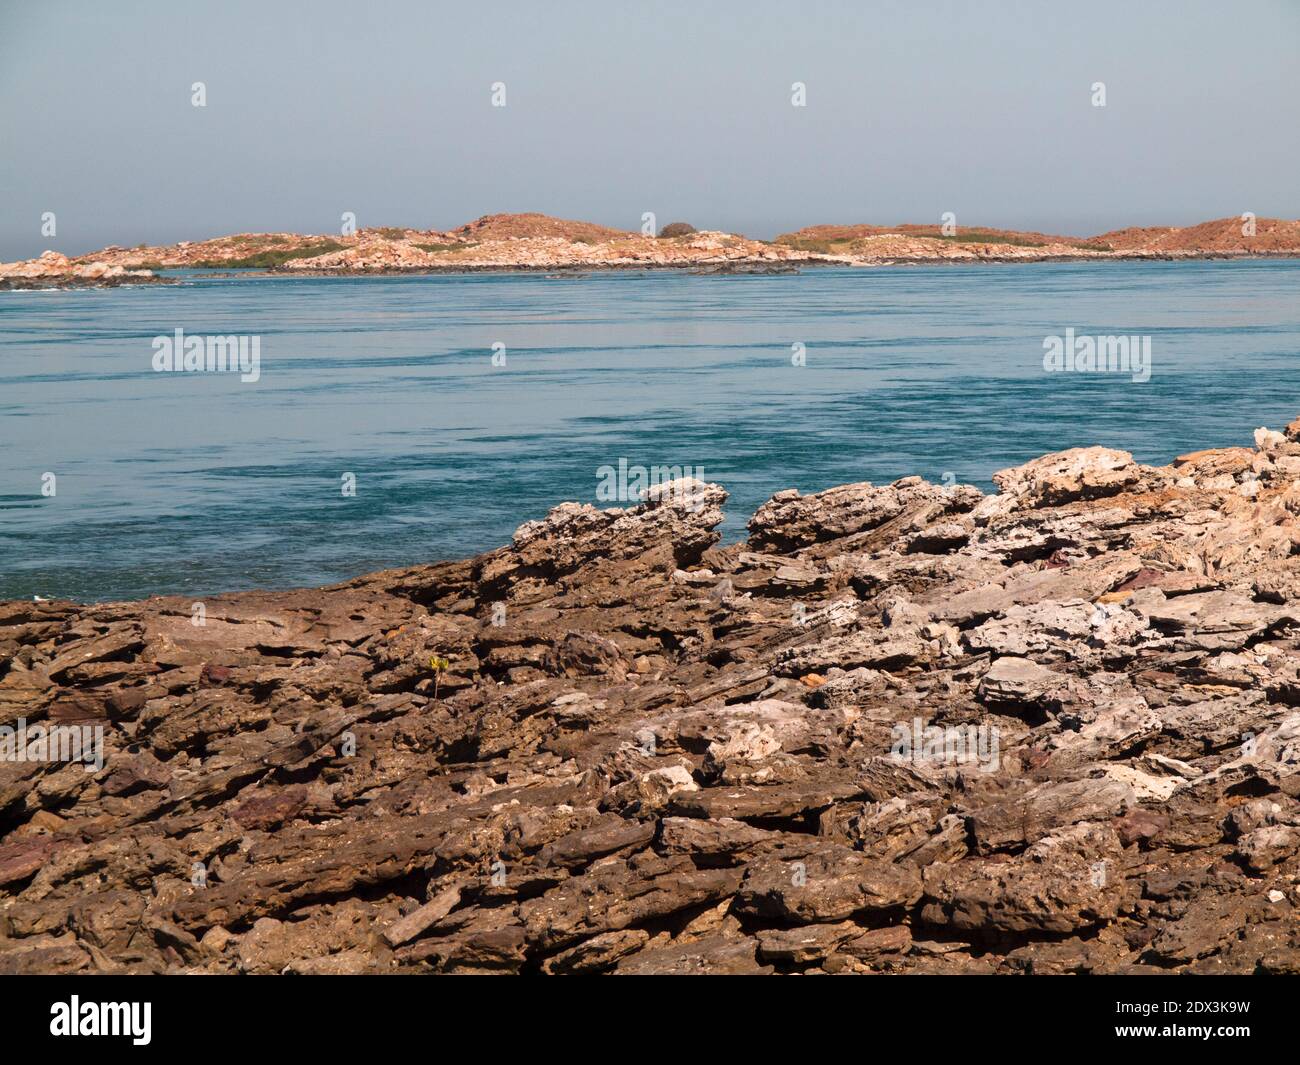 Rocky islets of the Buccaneer Archipelago from One Arm Point, Dampier Peninsula, Western Australia Stock Photo